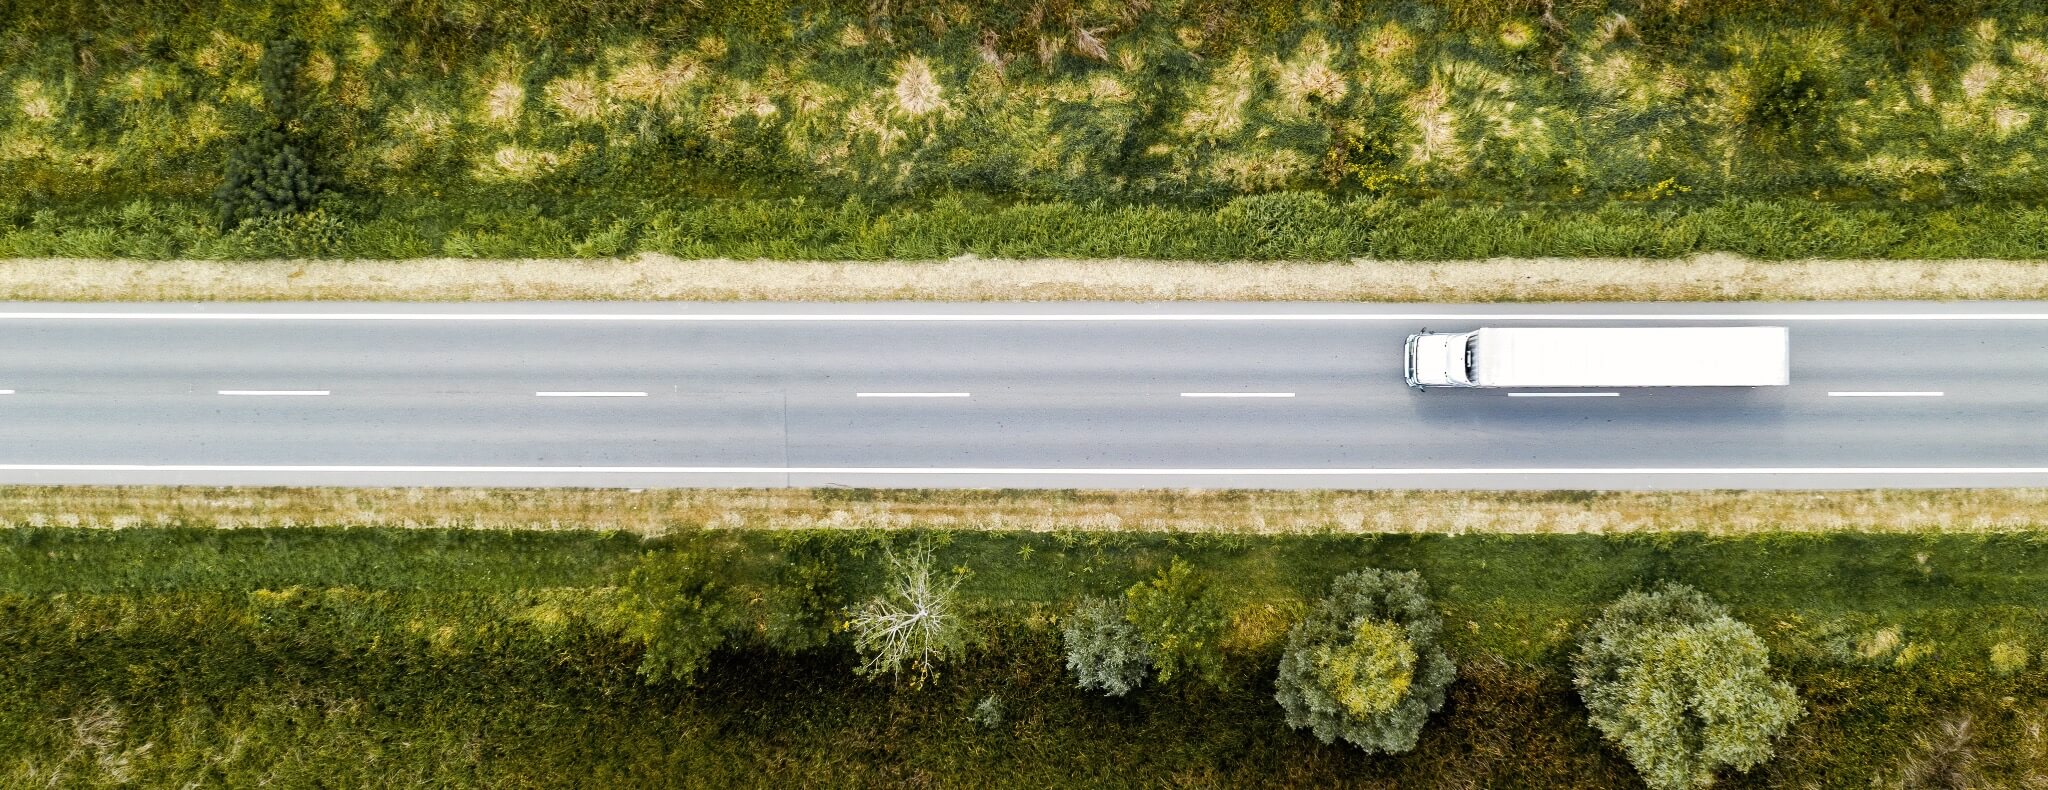 A white truck on a straight road seen from directly above.